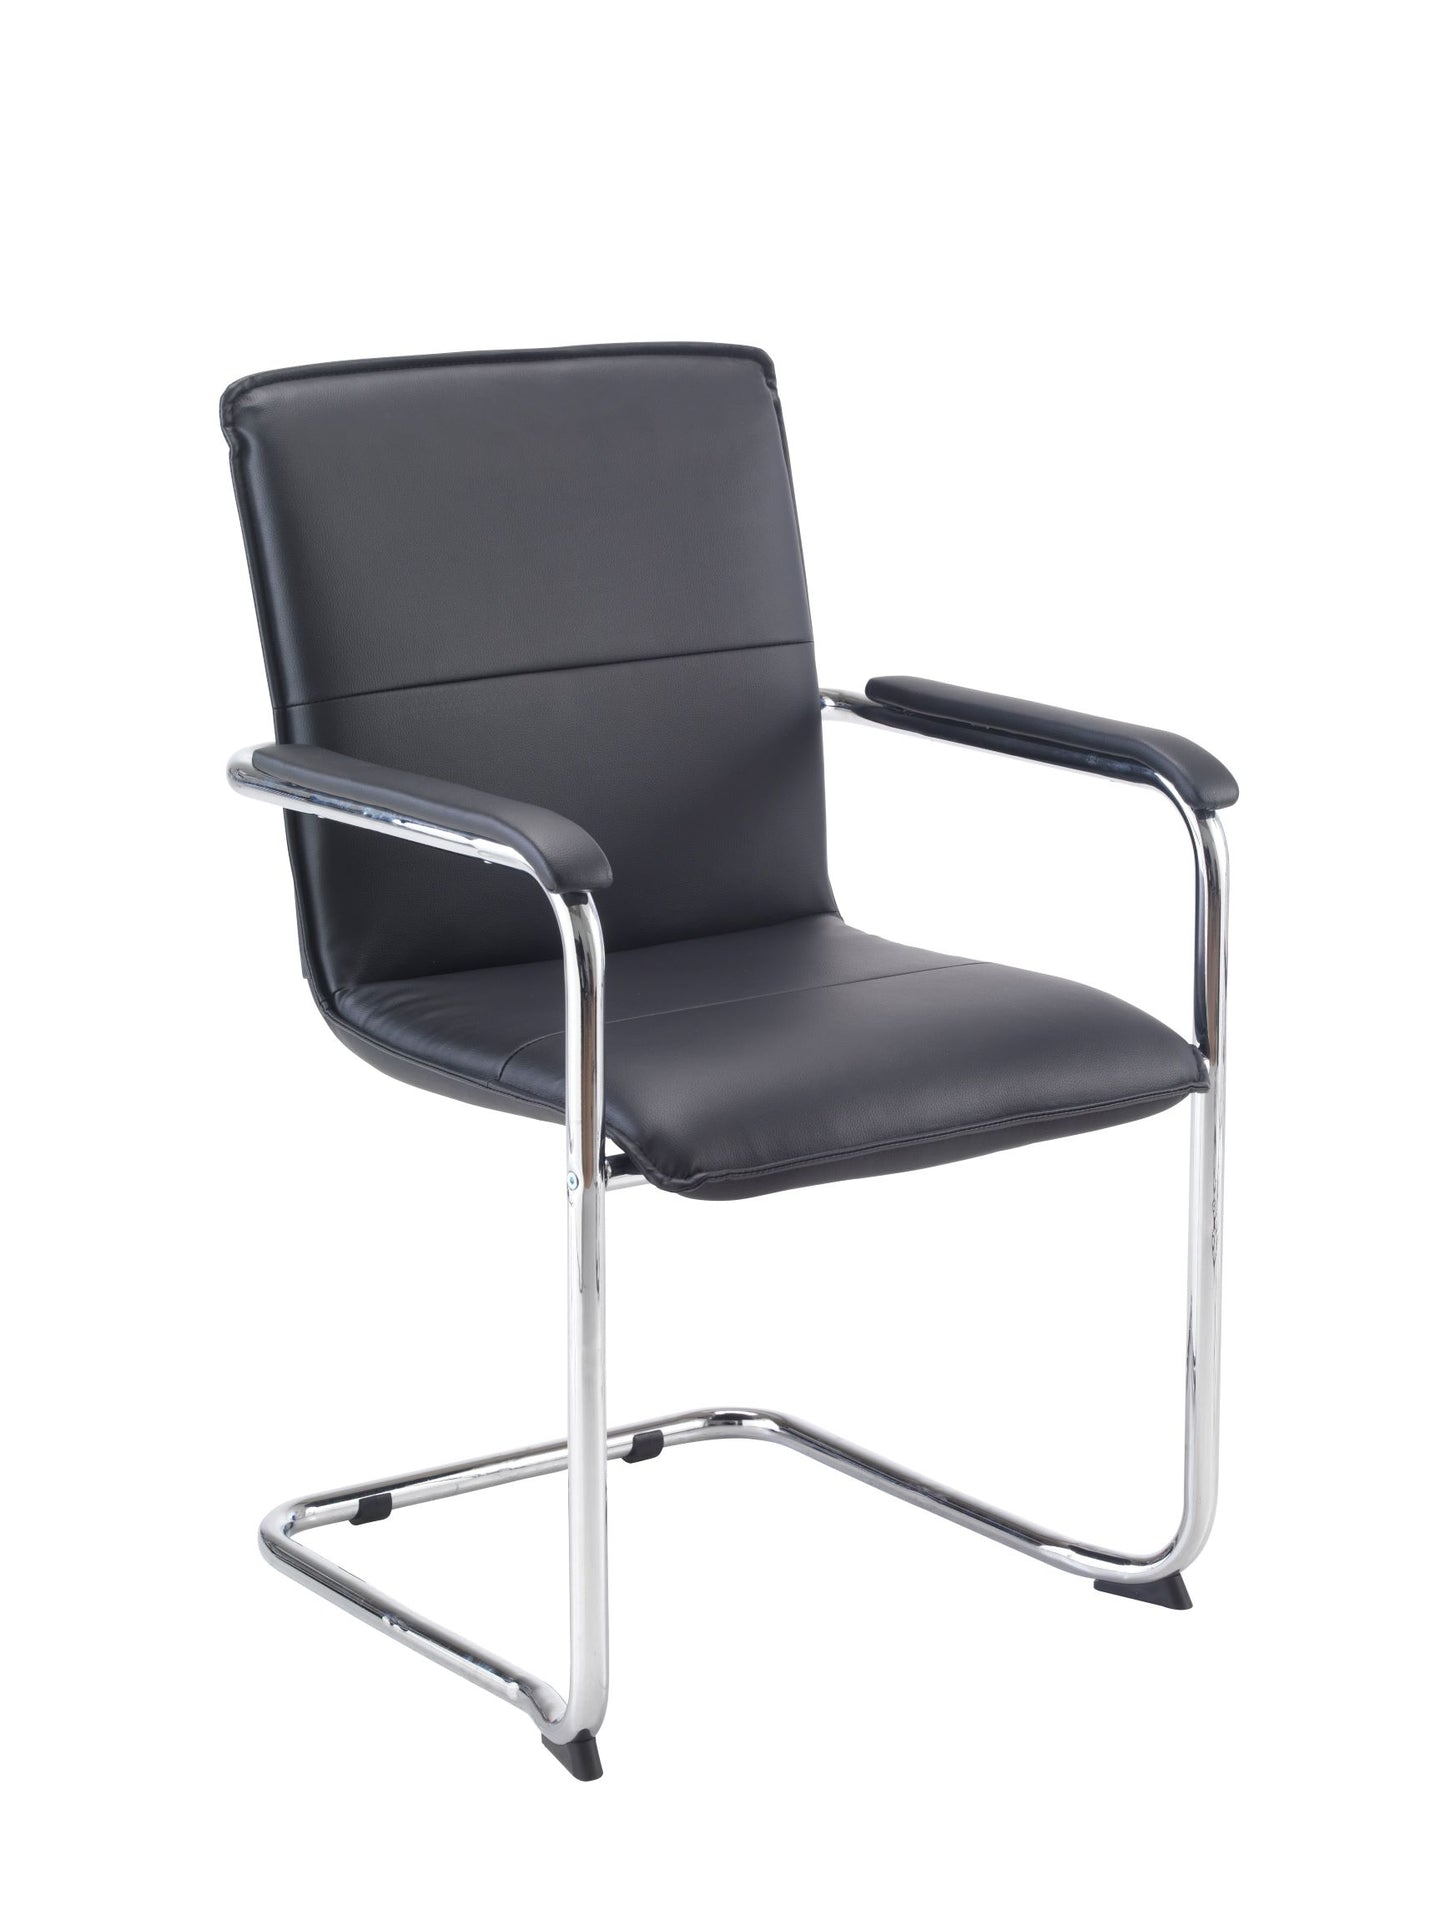 Pavia - Includes FREE Mainland UK Delivery - Minimum order 2 chairs